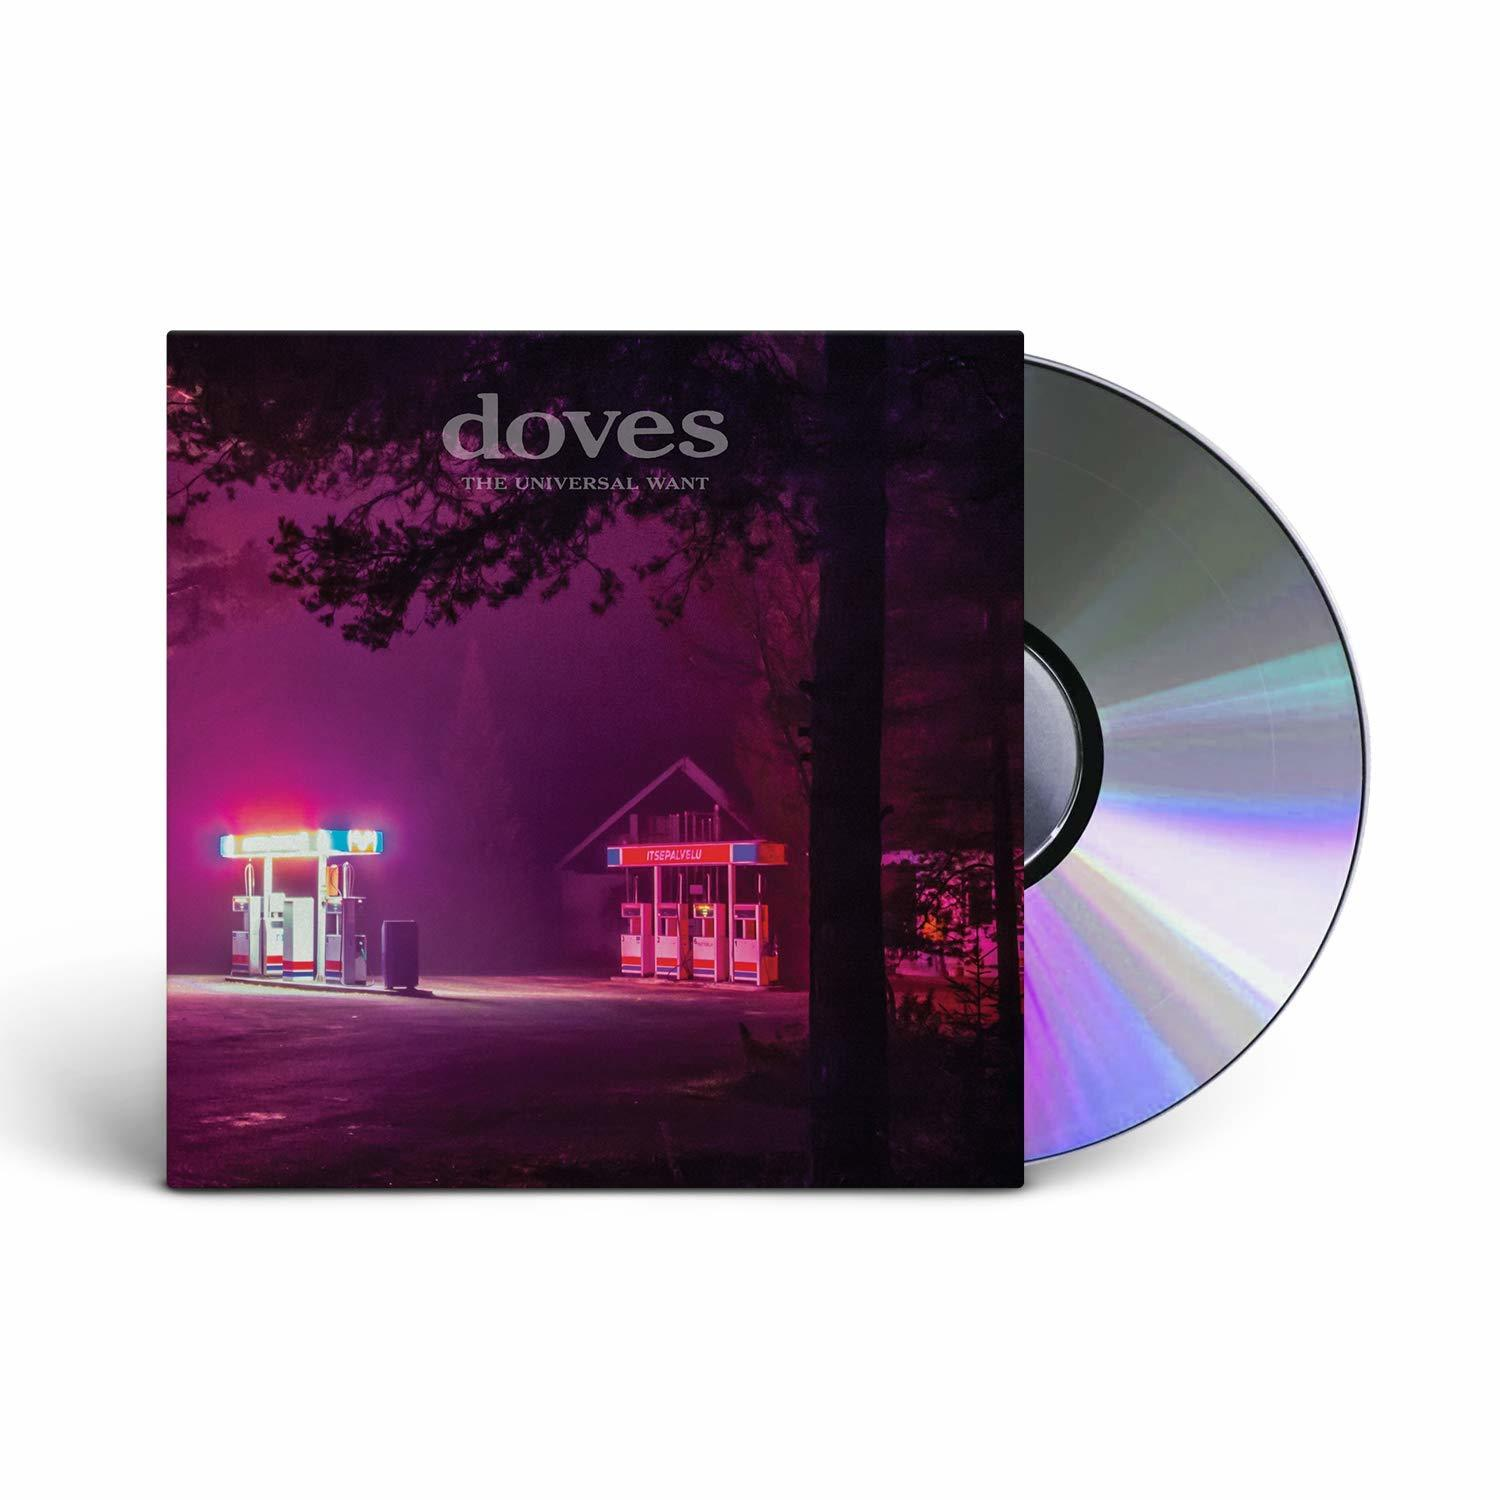 (CD) Doves The - Want - Universal